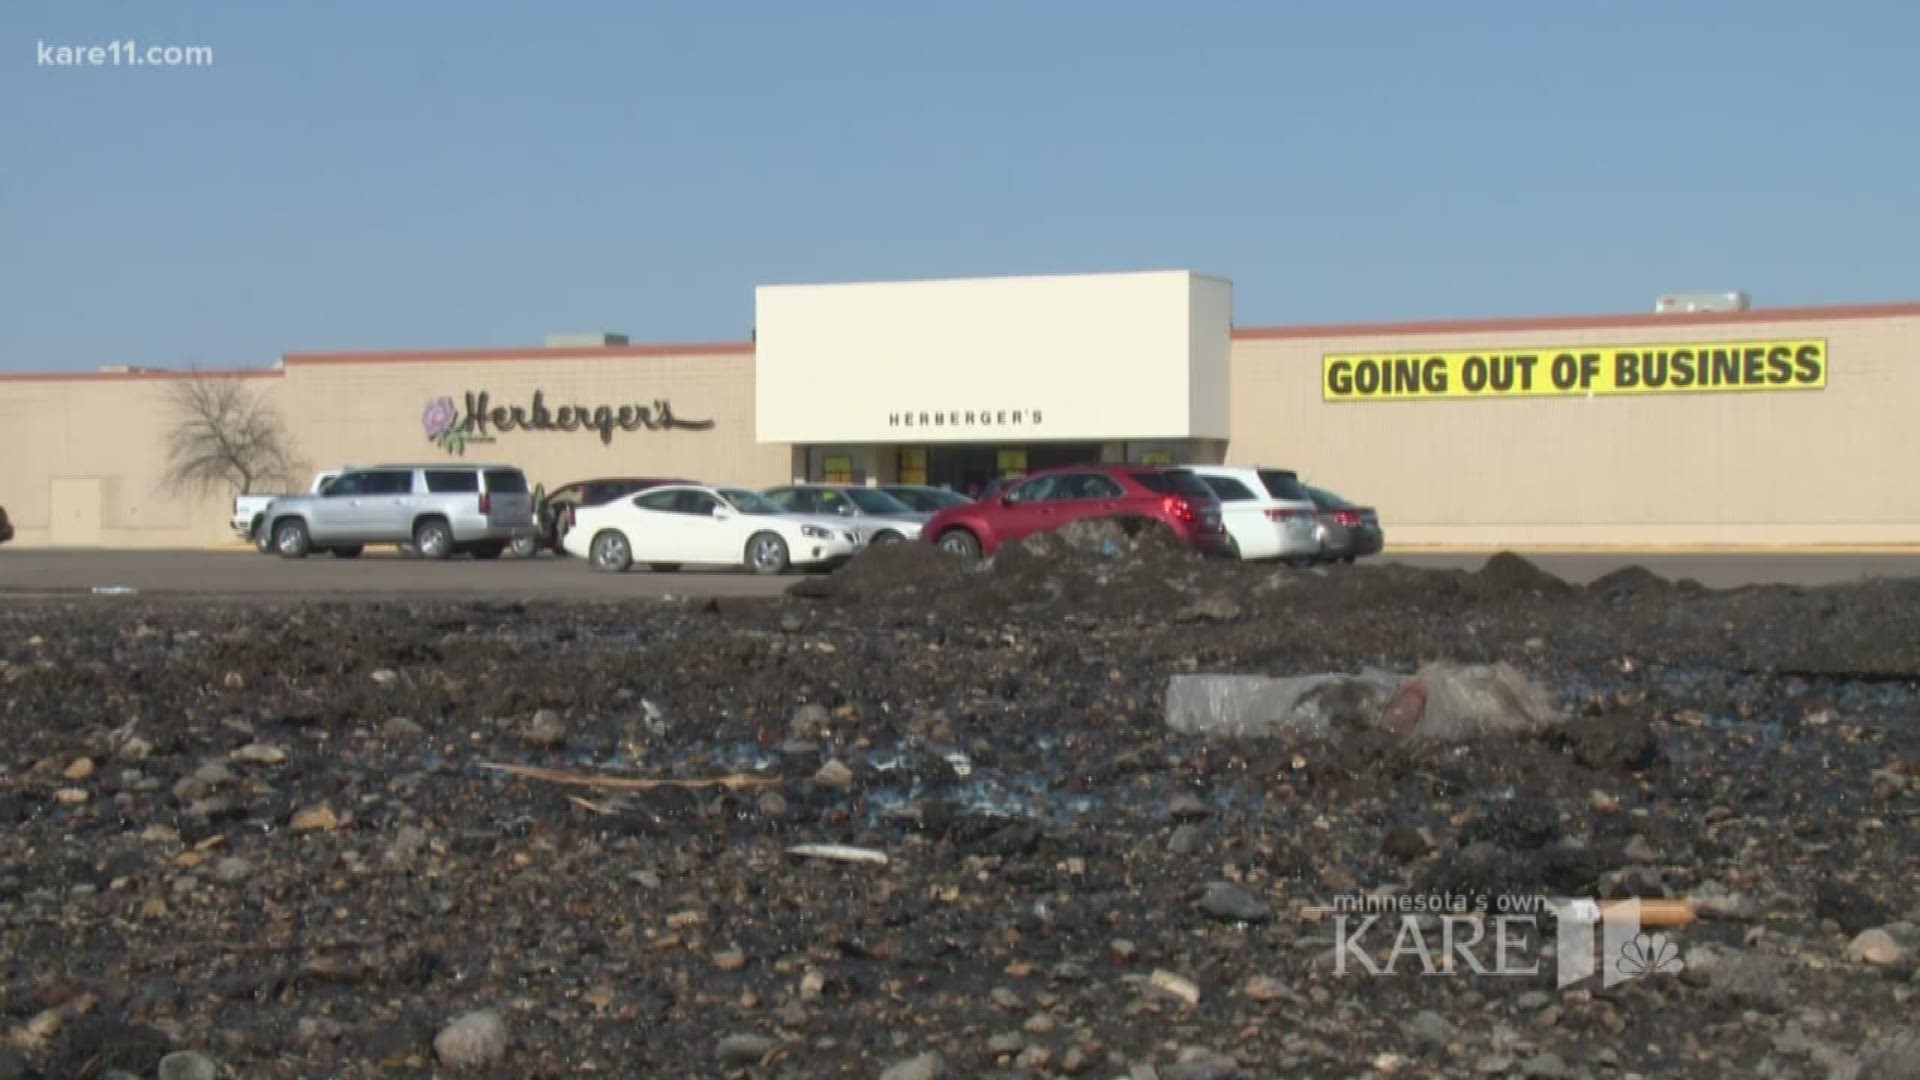 More and more people are shopping online, and that's having a big impact on the Viking Plaza Mall in Alexandria. It's not alone. Malls across the country are losing anchor stores. KARE 11's Heidi Wigdahl reports on what the future holds for Viking Plaza.